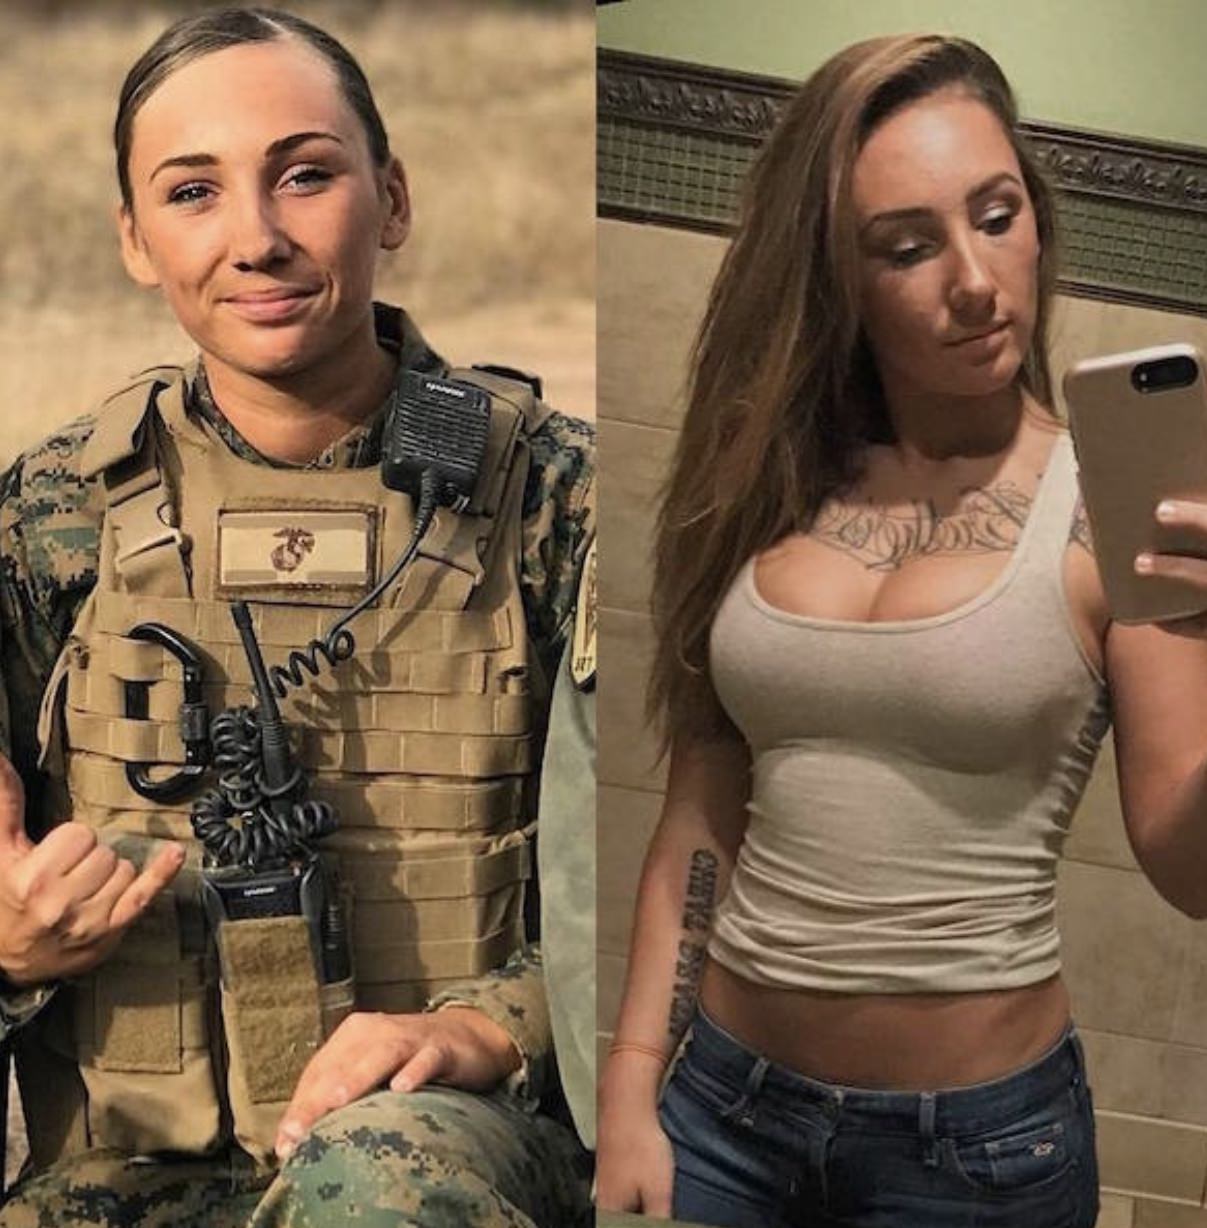 Hot female marine in her uniform and bullet-proof best and another of her huge boobs in a tanktop